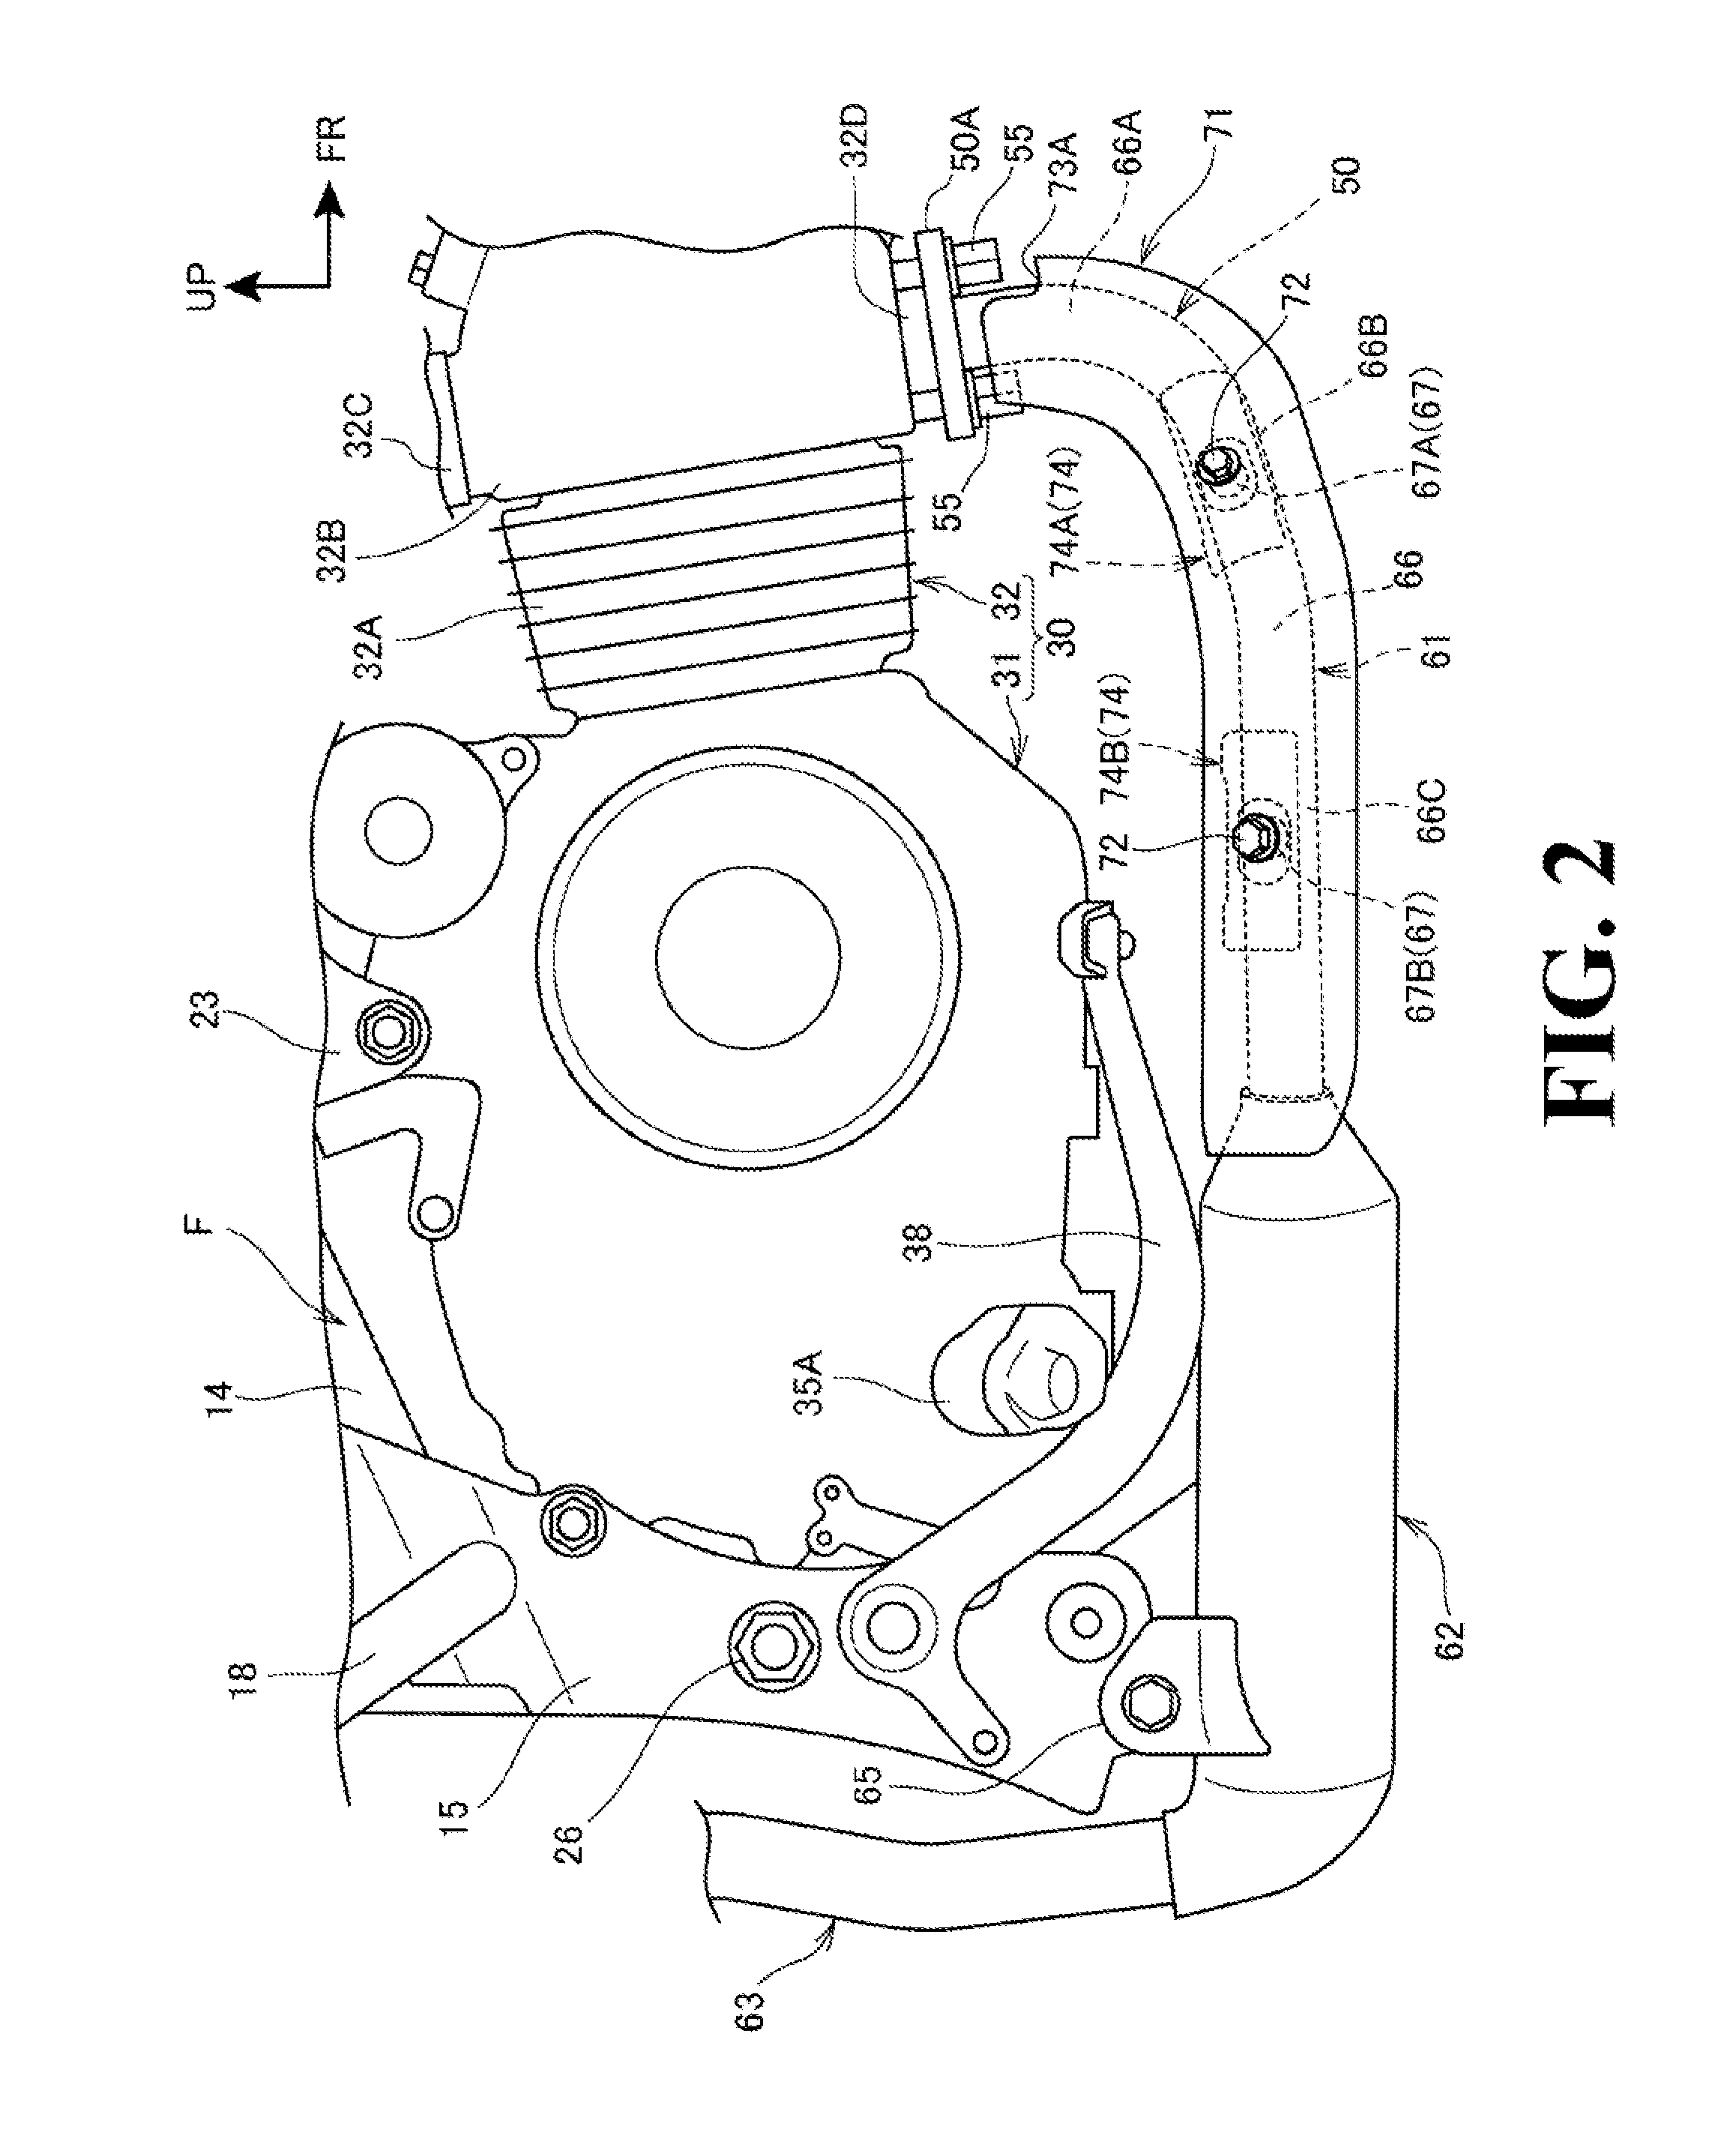 Exhaust pipe cover structure for saddle-ride type vehicle